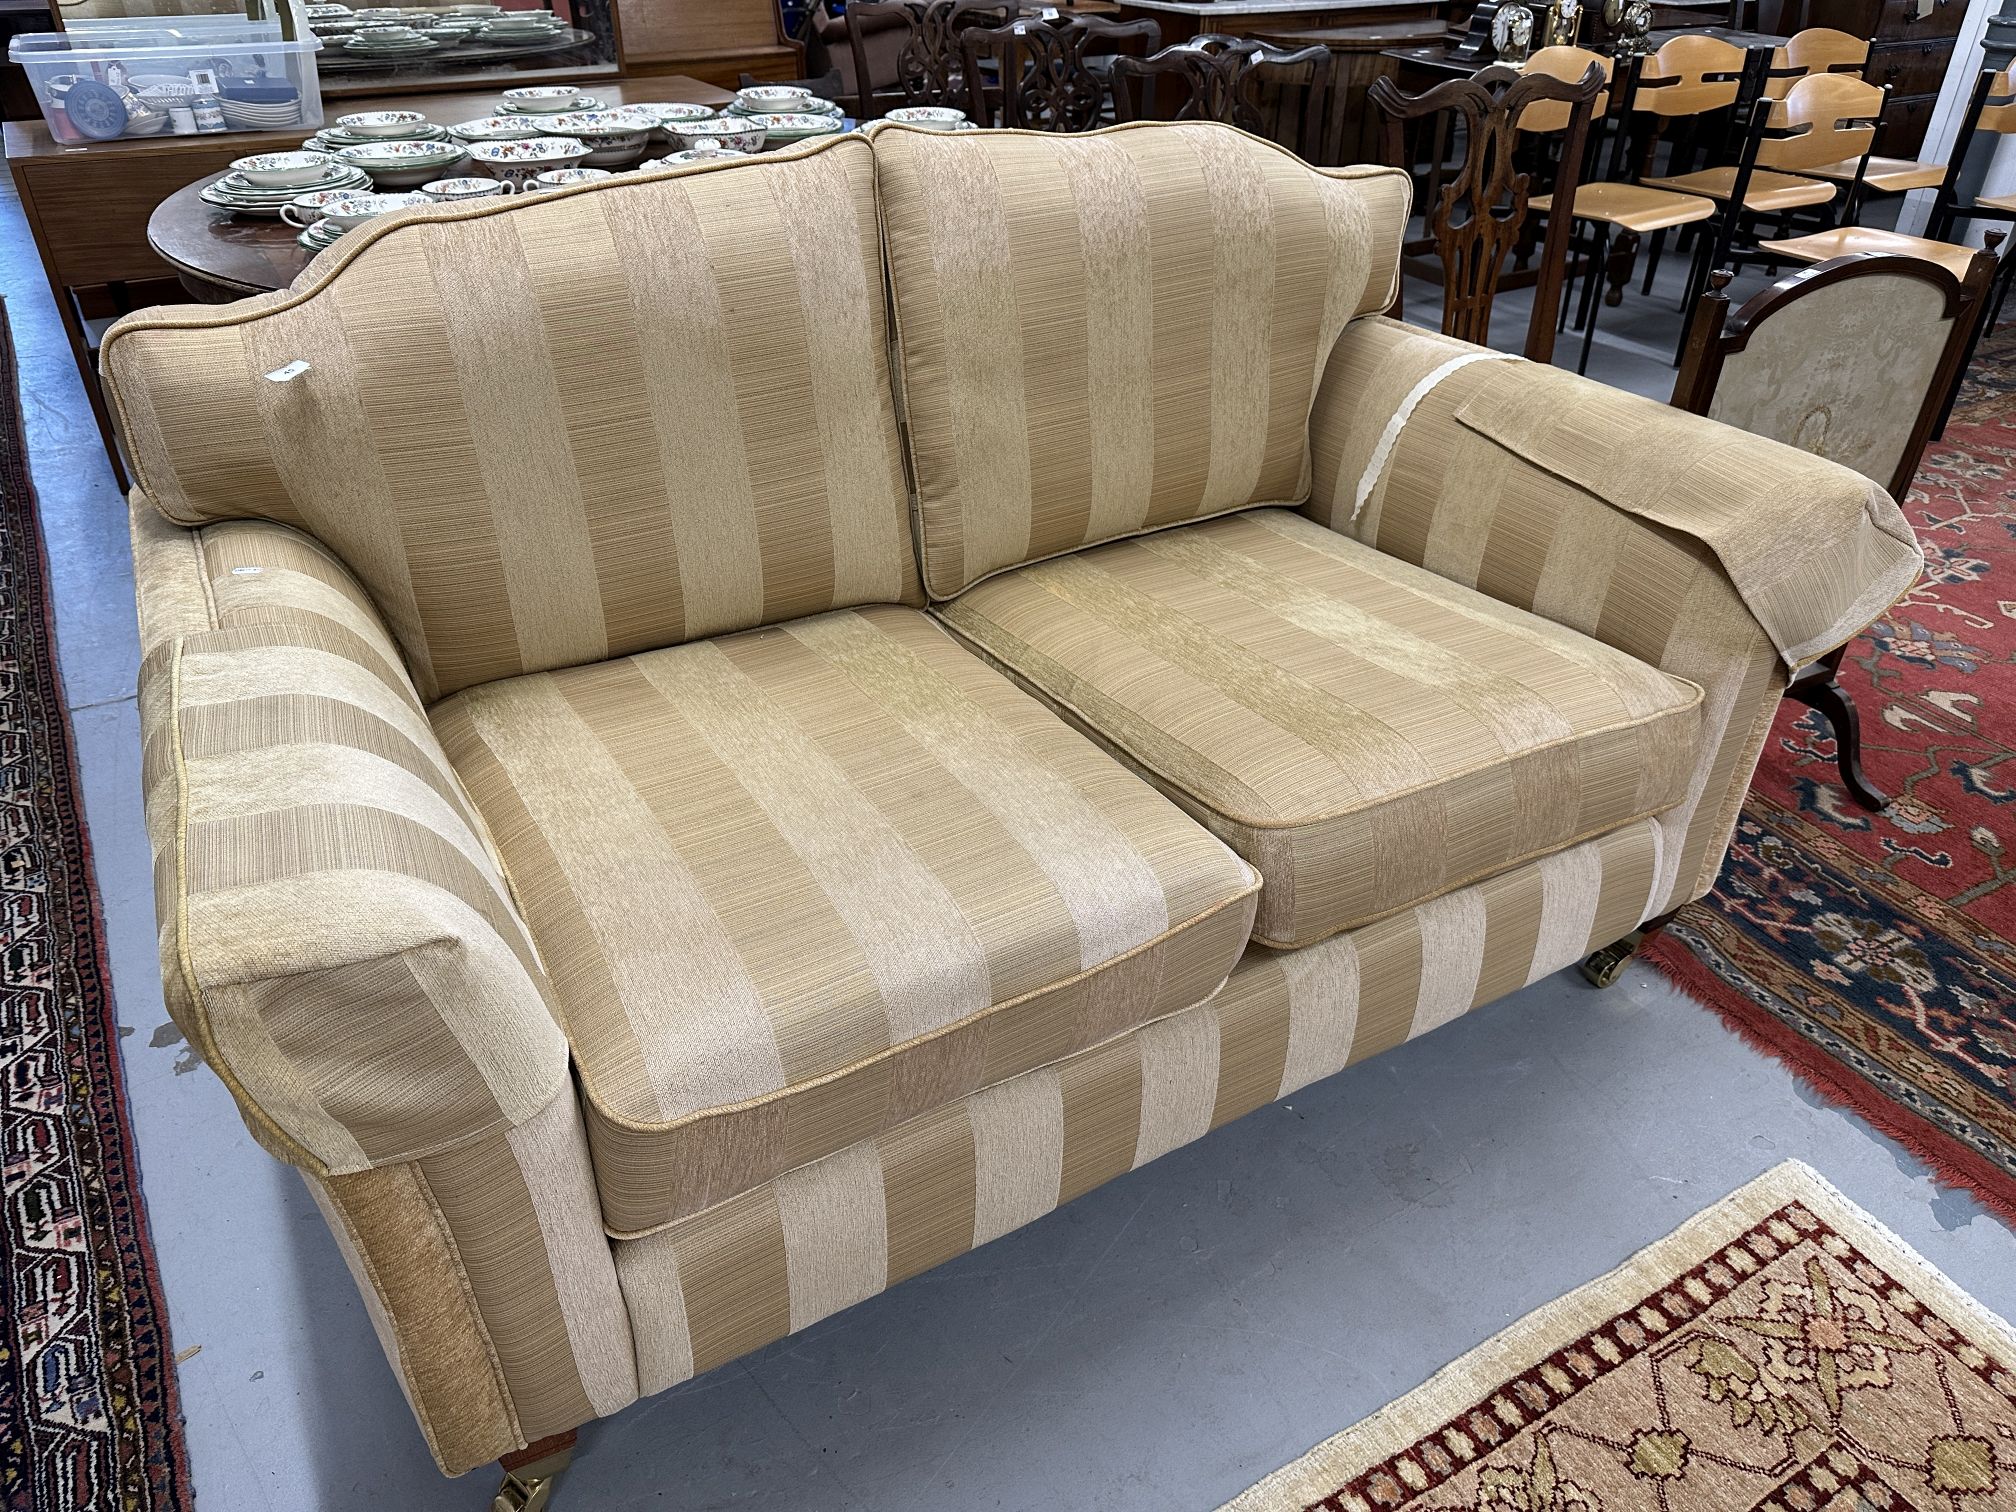 20th cent. Upholstered three-seater sofa, turned supports with cup and cover castors.